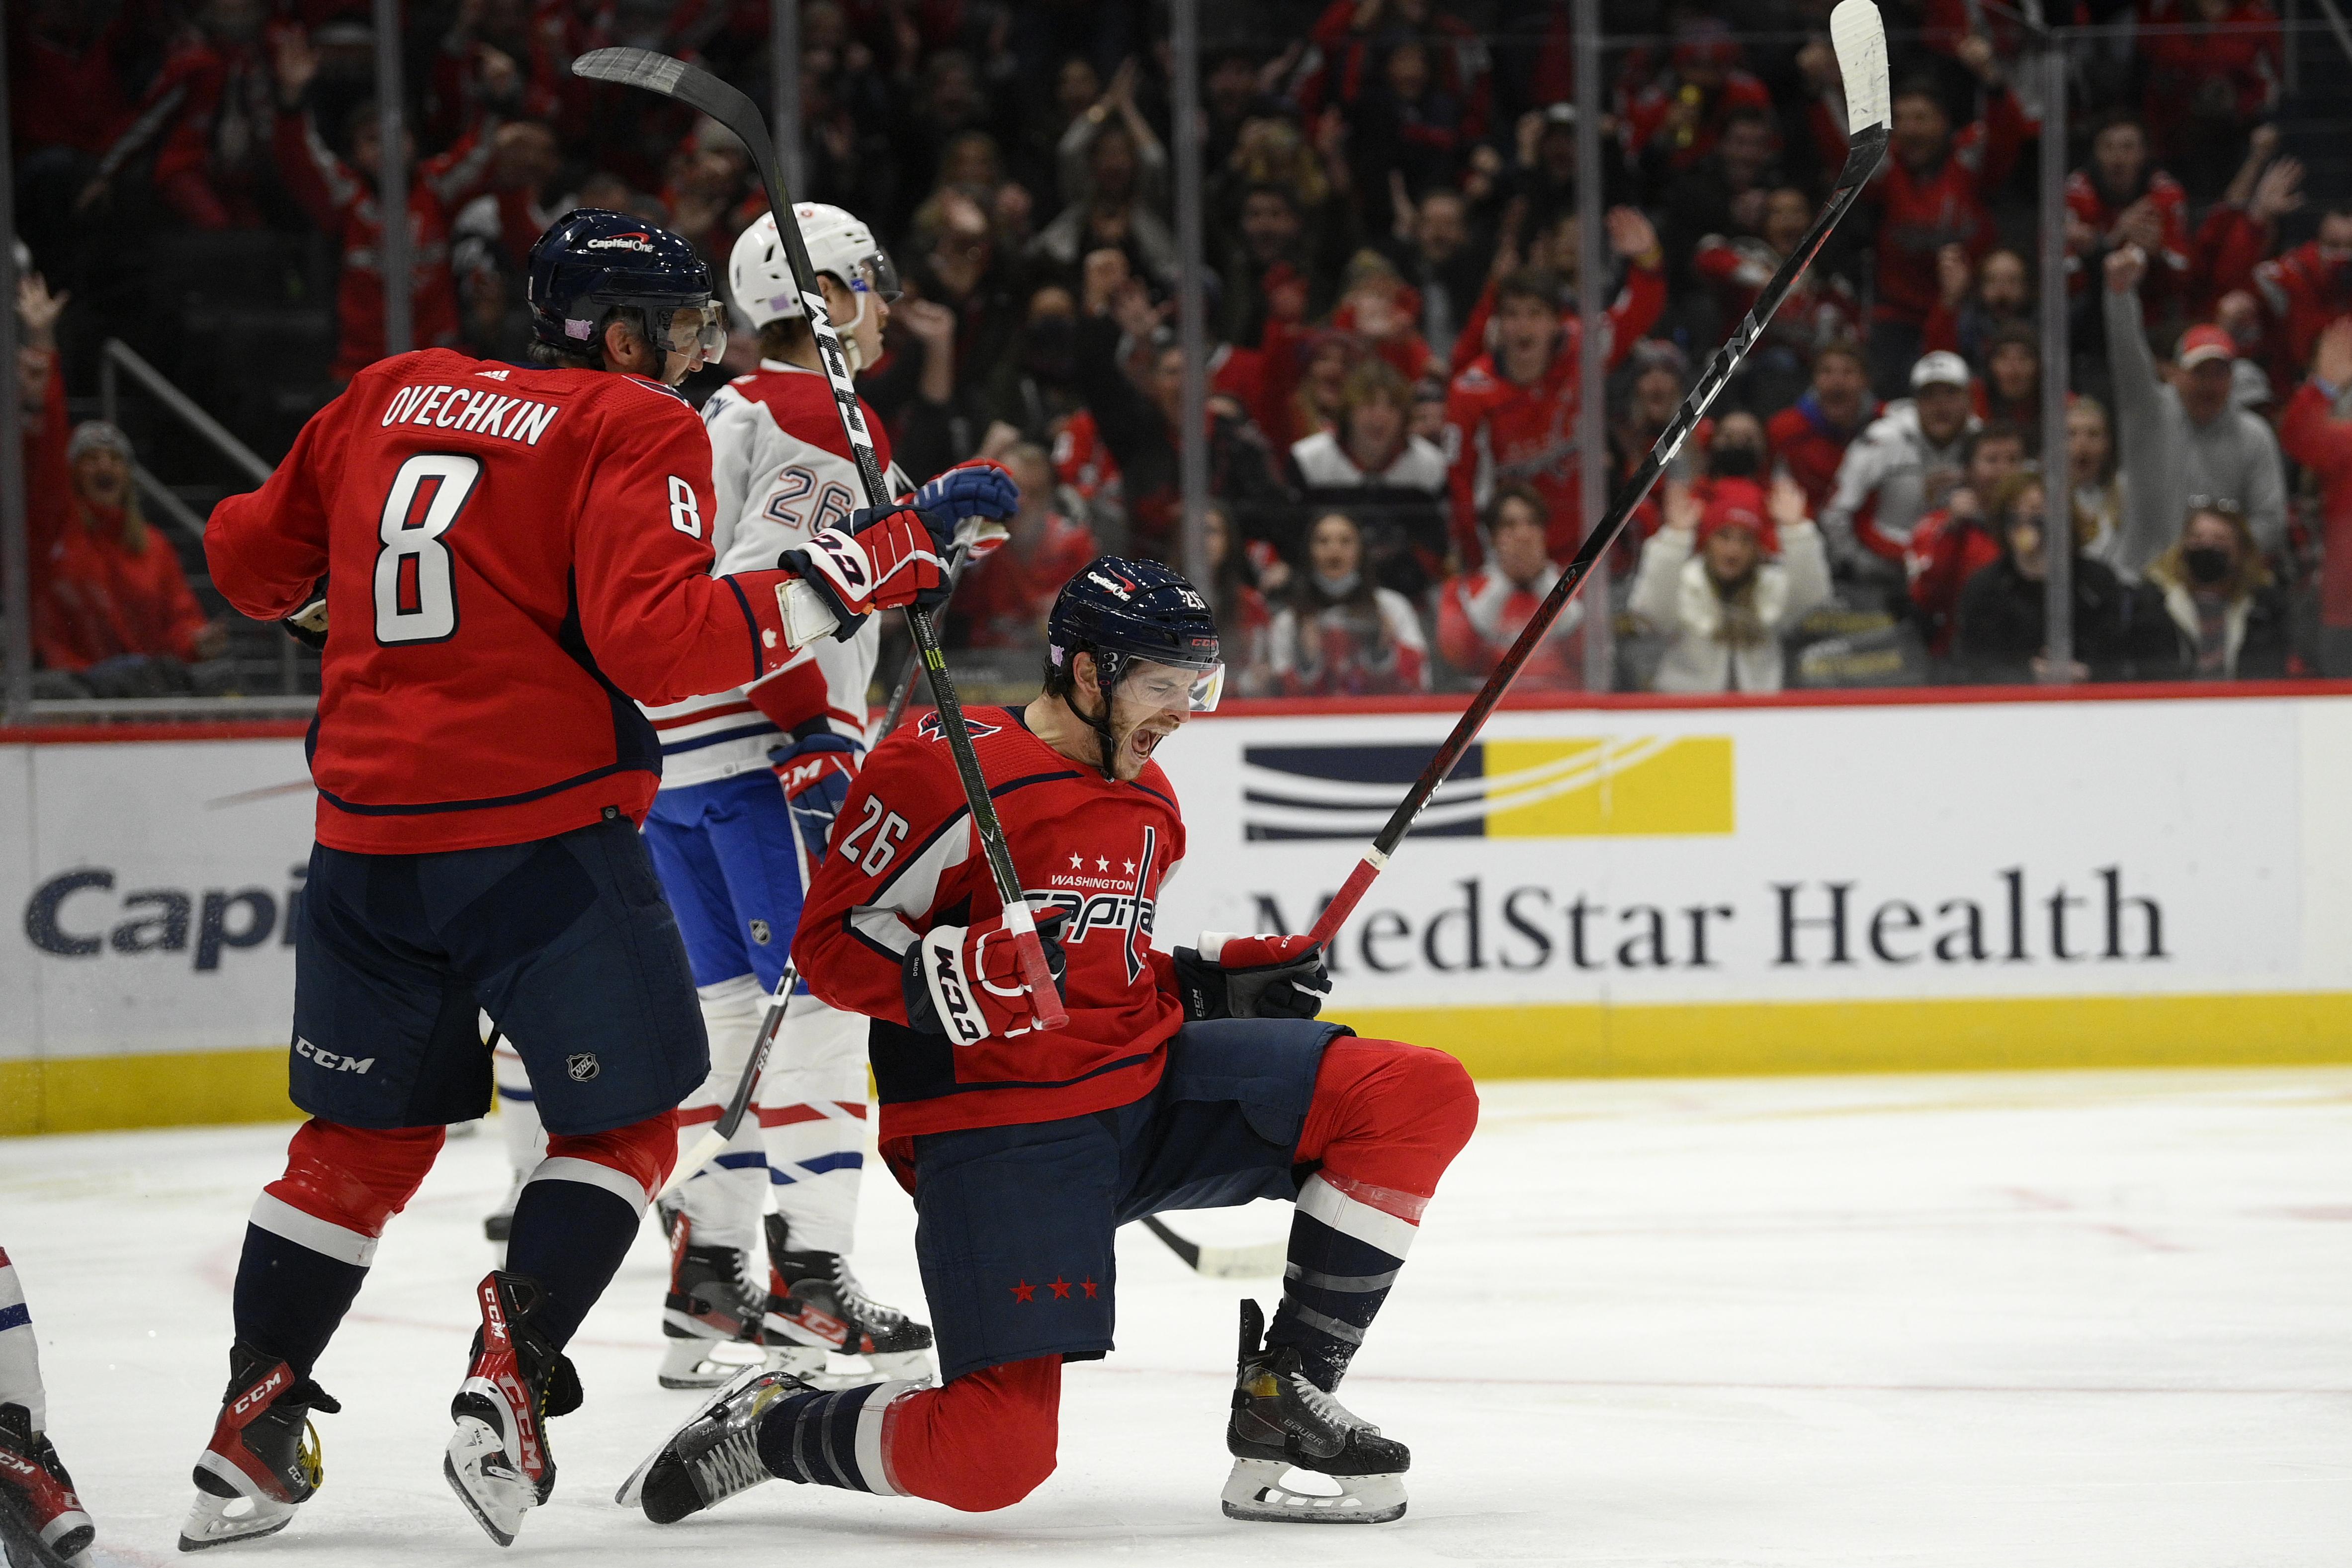 First-period success paying dividends for Capitals - Washington Times